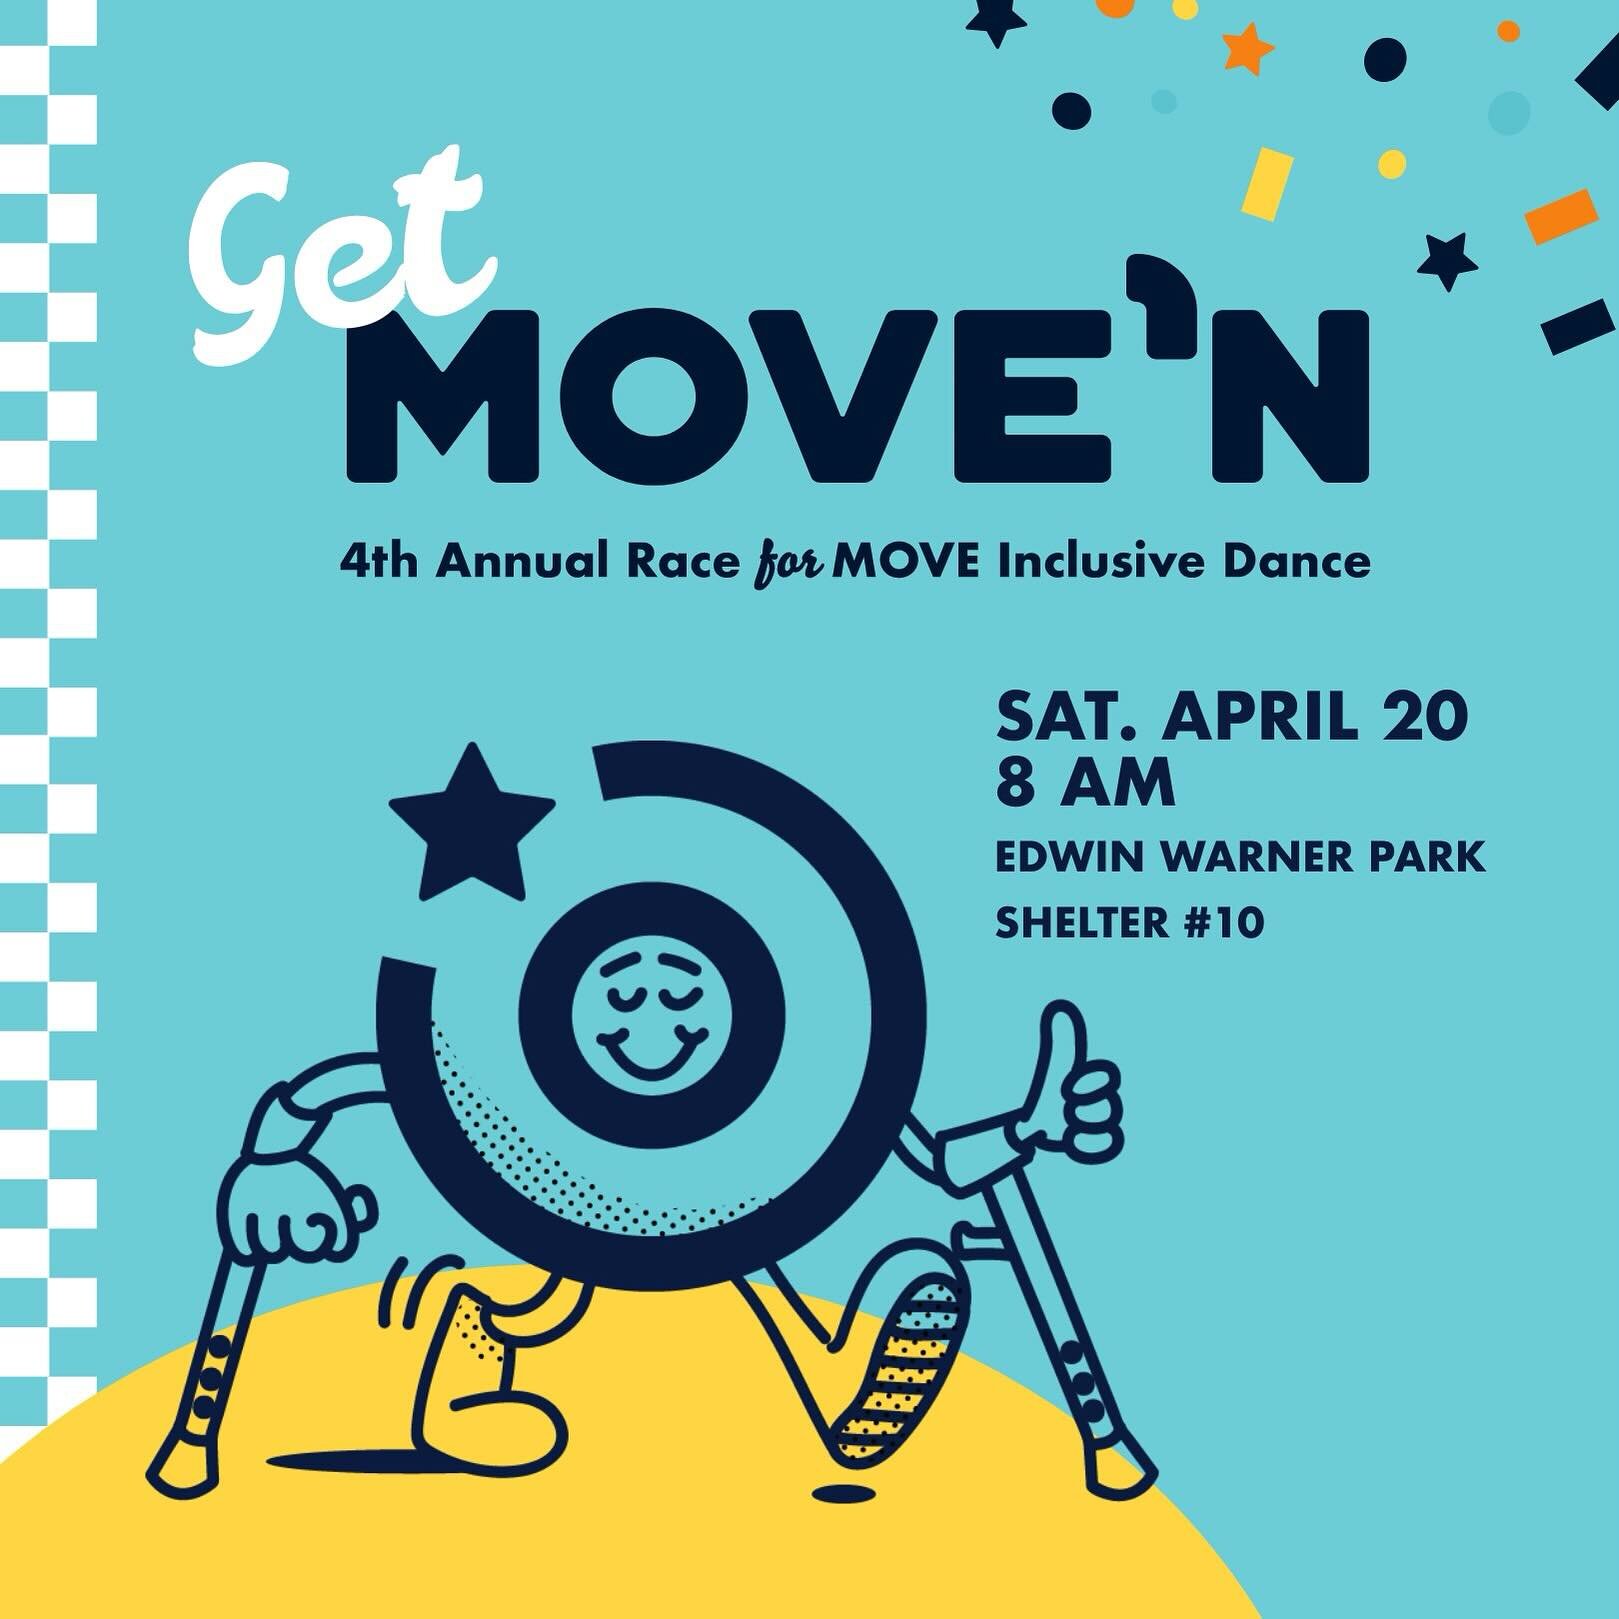 Can you believe we&rsquo;re less than a month away from the Get MOVE&rsquo;n 5K? Have you signed up yet?

Even if you&rsquo;re not a runner, you can still come and join the party! Purchase a general admission ticket to enjoy our amazing student perfo